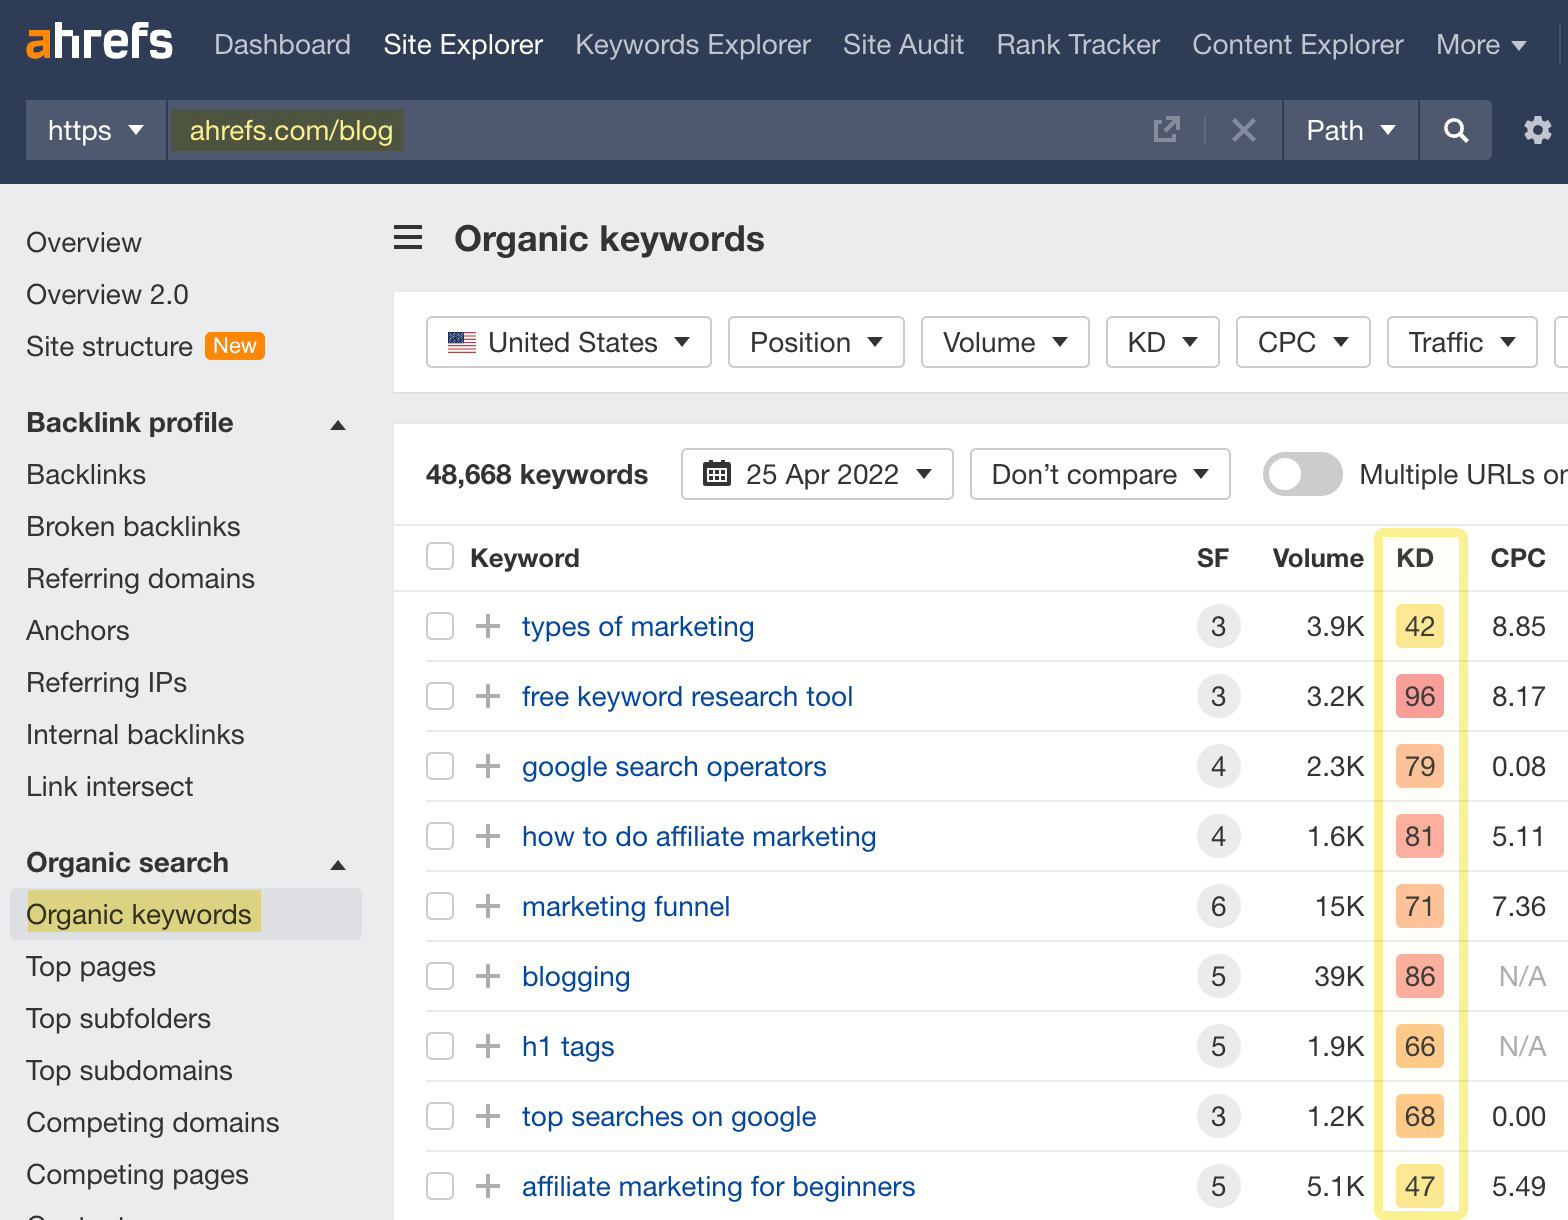 Organic keywords report results for Ahrefs' blog